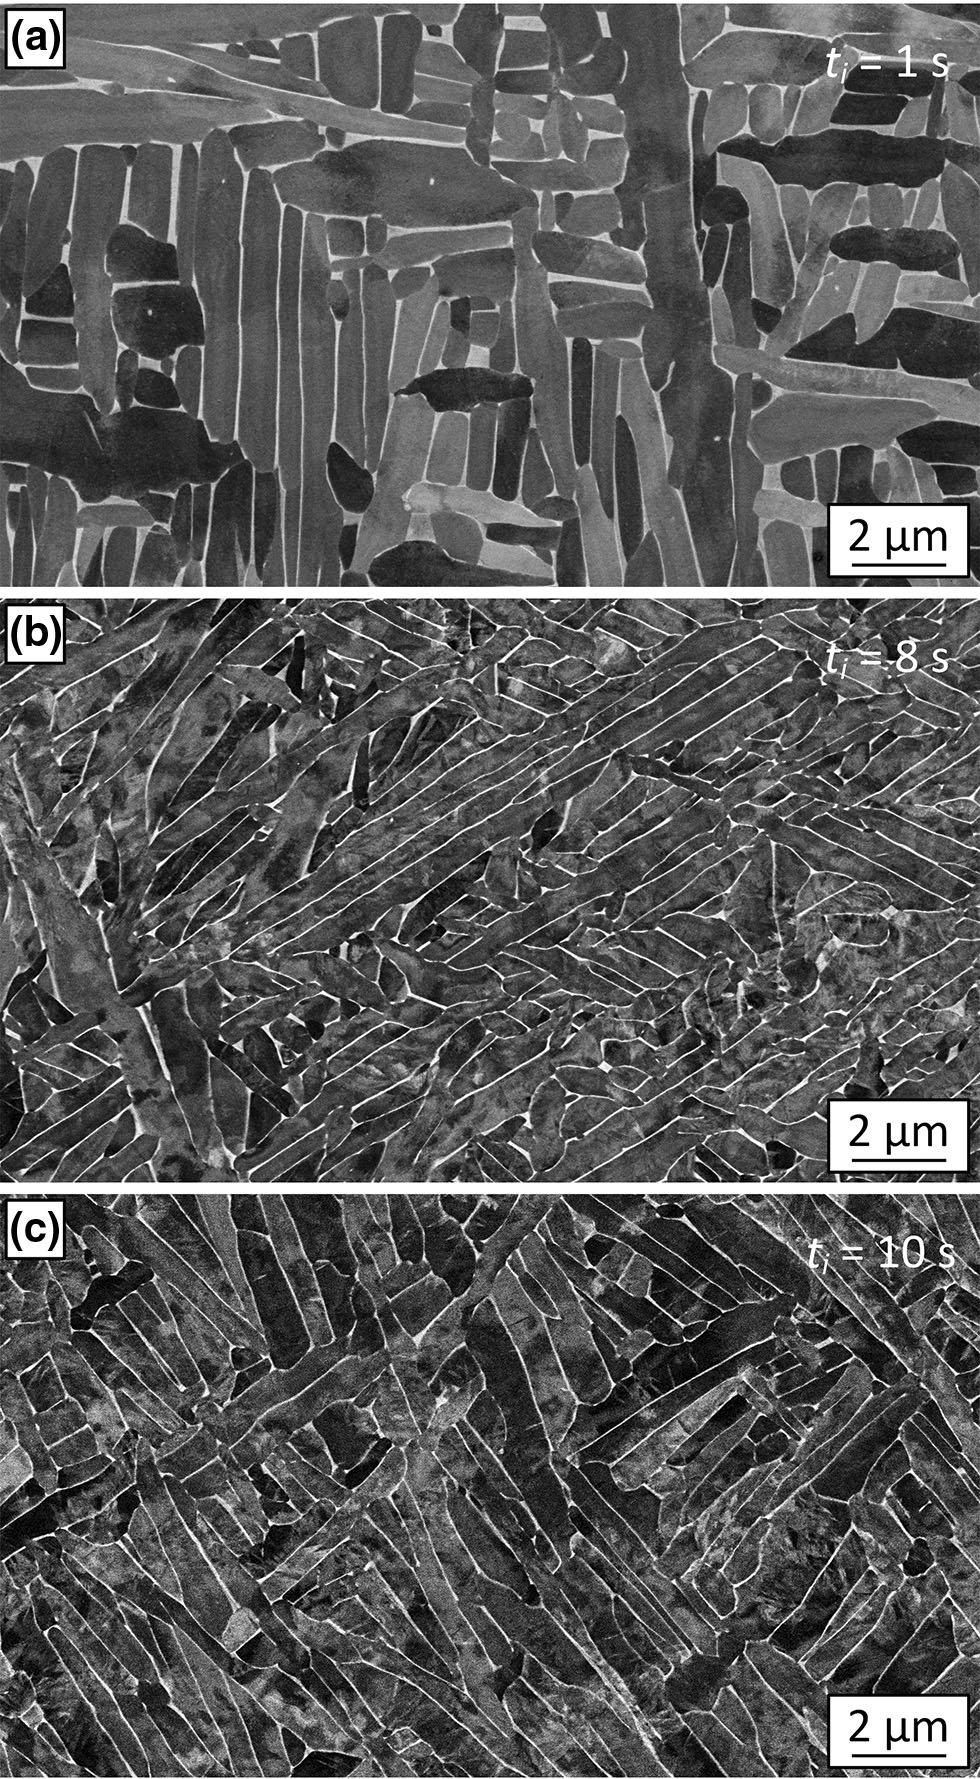 2680 Lui, Xu, Pateras, Qian, and Brandt investigating the effect of inter-layer time and build height on the microstructure and mechanical properties of SLM-fabricated Ti 6Al 4V.